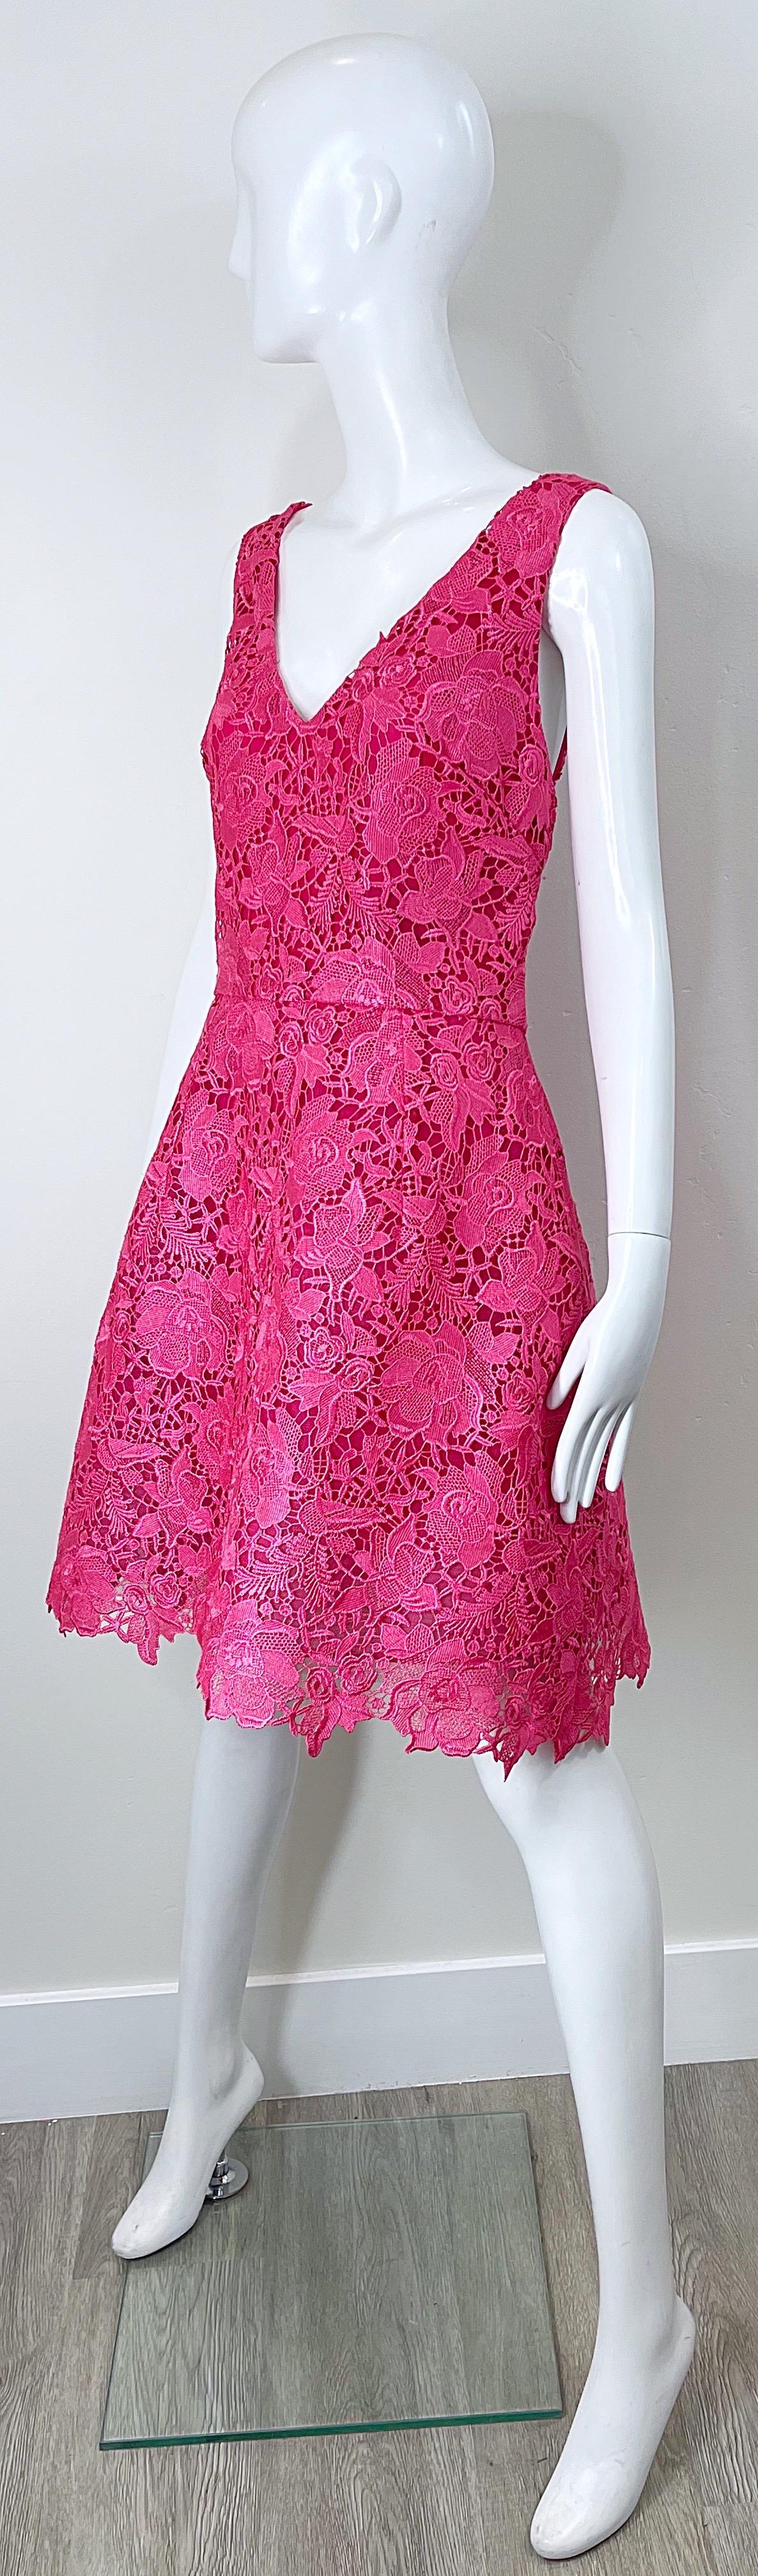 NWT Monique Lhuillier Size 8 / 10 Hot Pink Lace Fit n Flare A Line Dress In New Condition For Sale In San Diego, CA